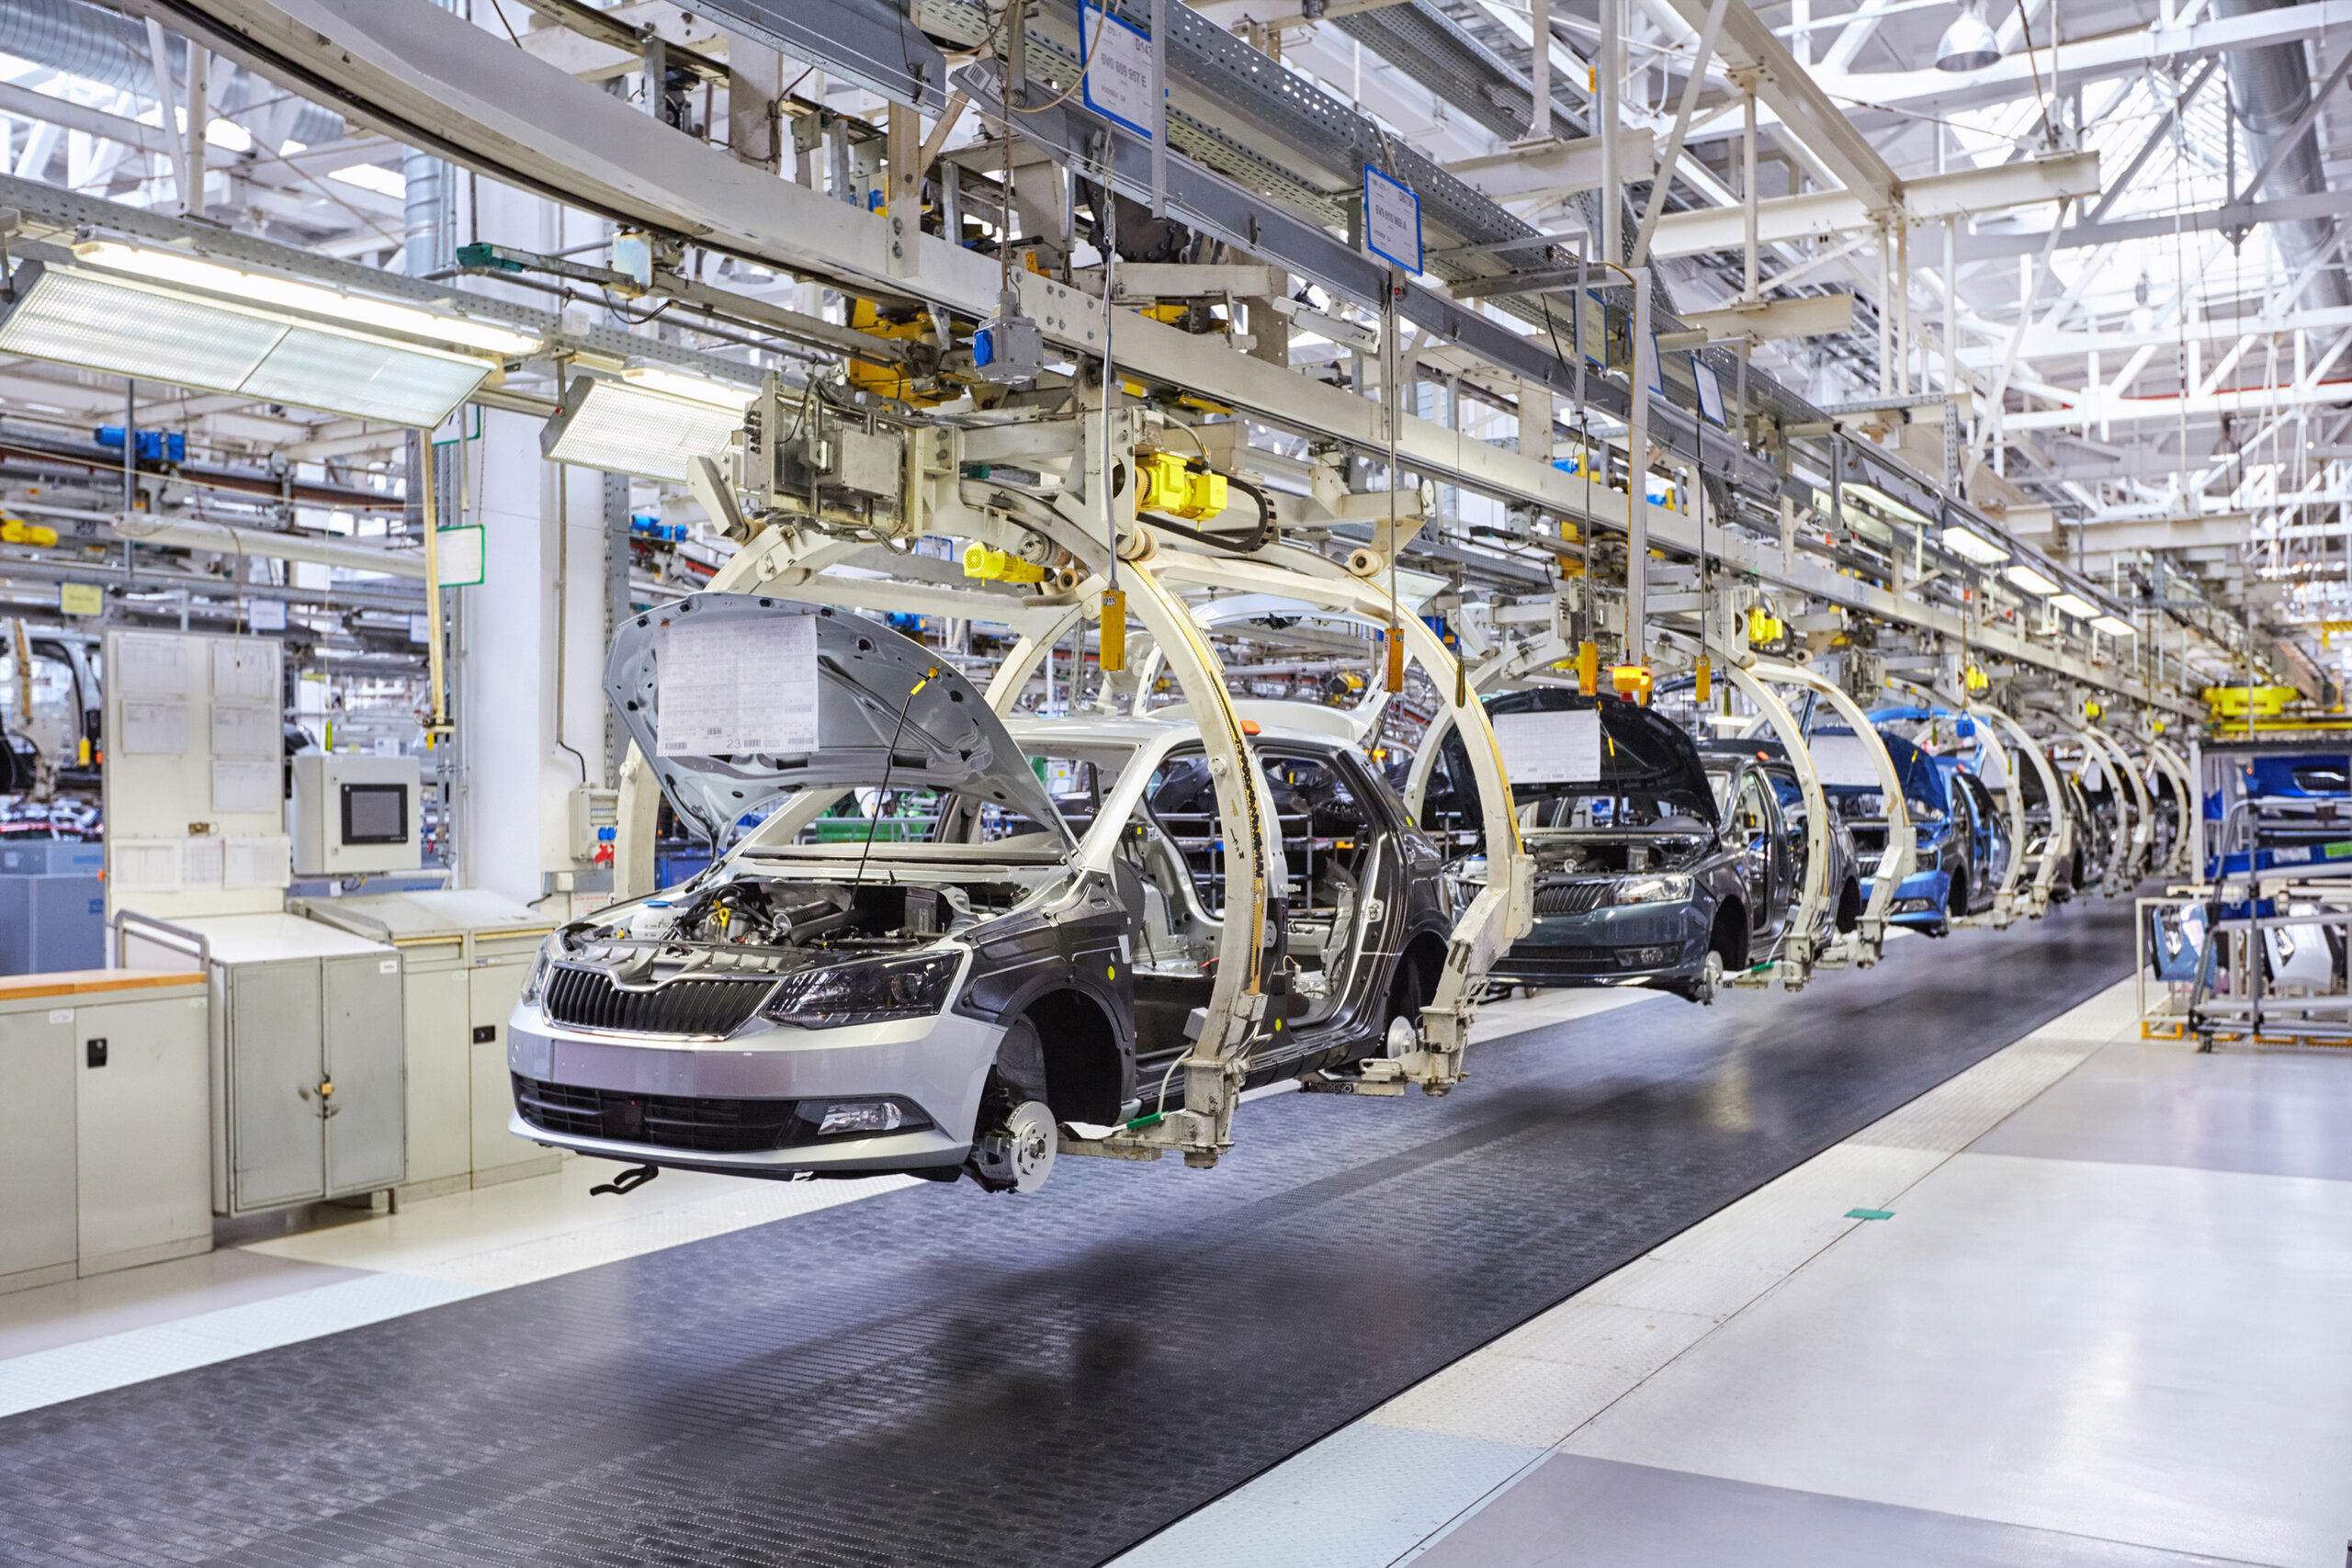 Cars are manufactured on a production line by robots